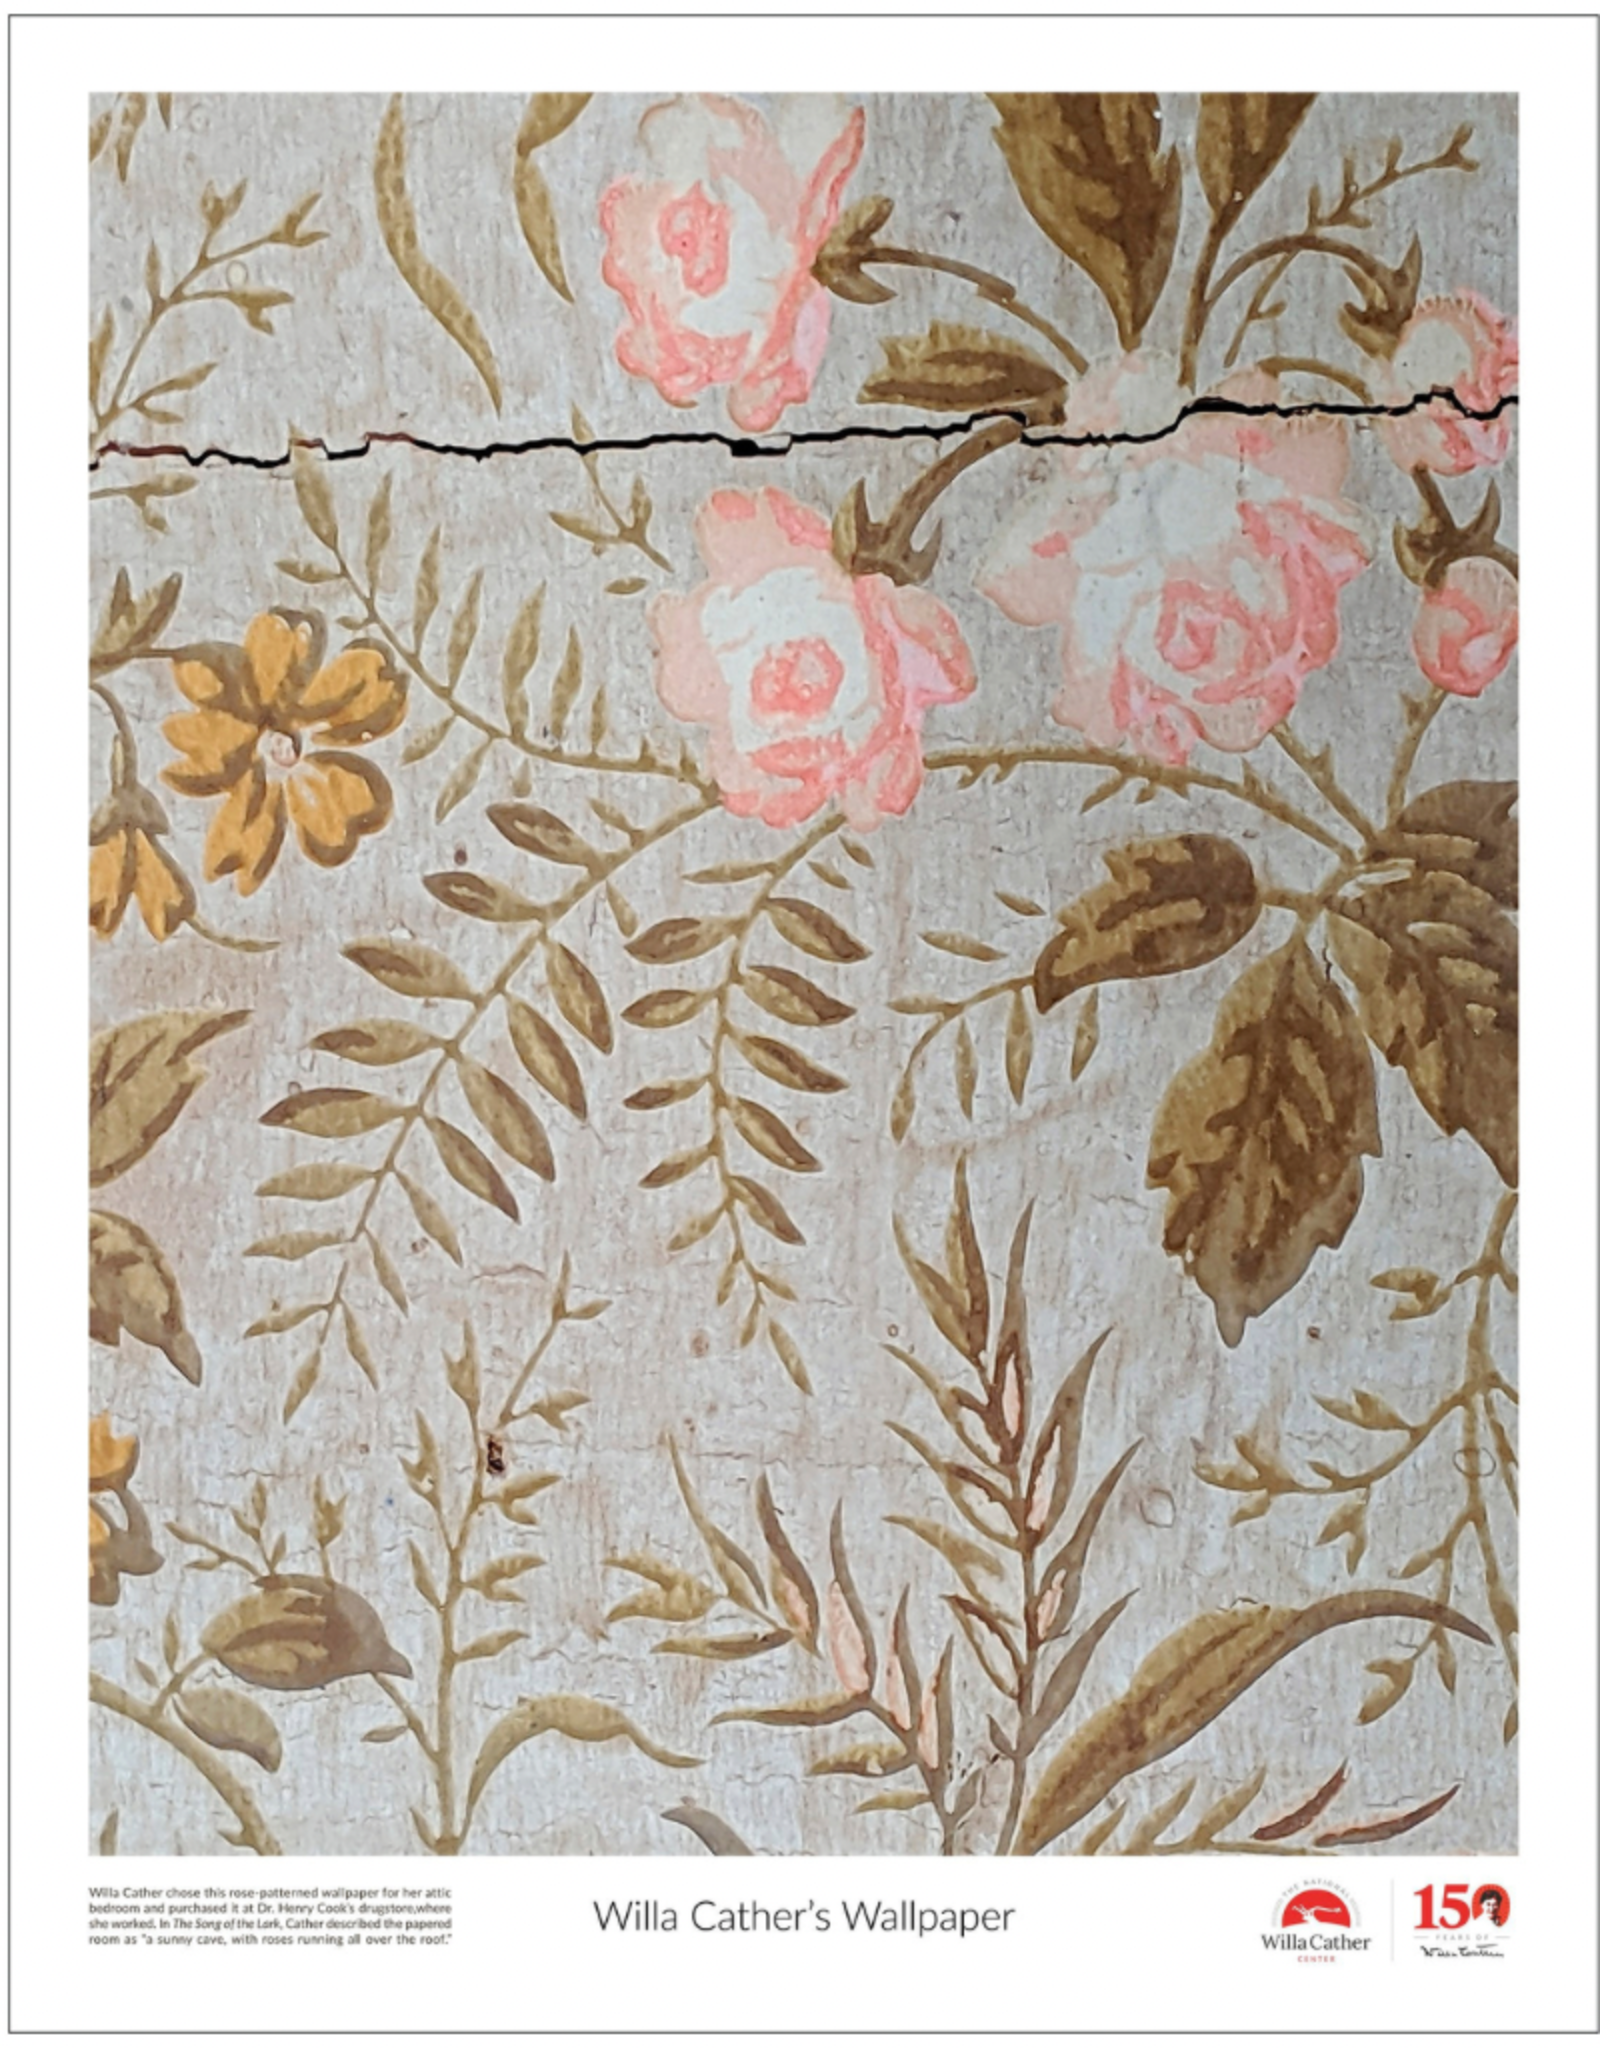 Willa Cather's Wallpaper Poster